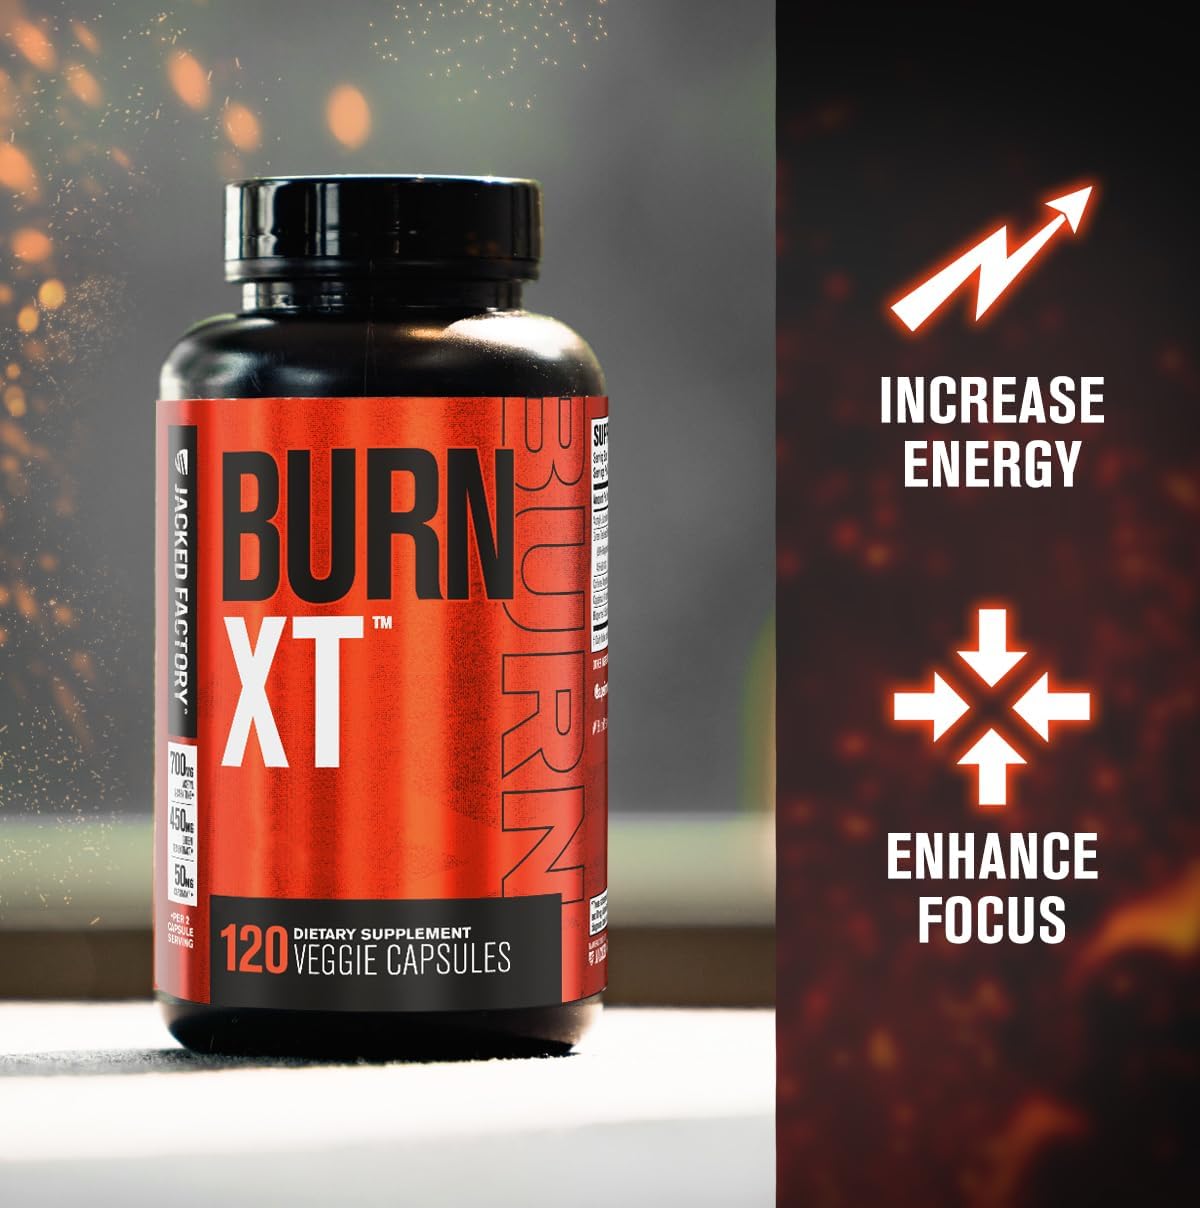 Jacked Factory Burn-XT Clinically Studied Fat Burner  Weight Loss Supplement - Appetite Suppressant  Energy Booster - with Acetyl L-Carnitine, Green Tea Extract and More - 60 Natural Diet Pills